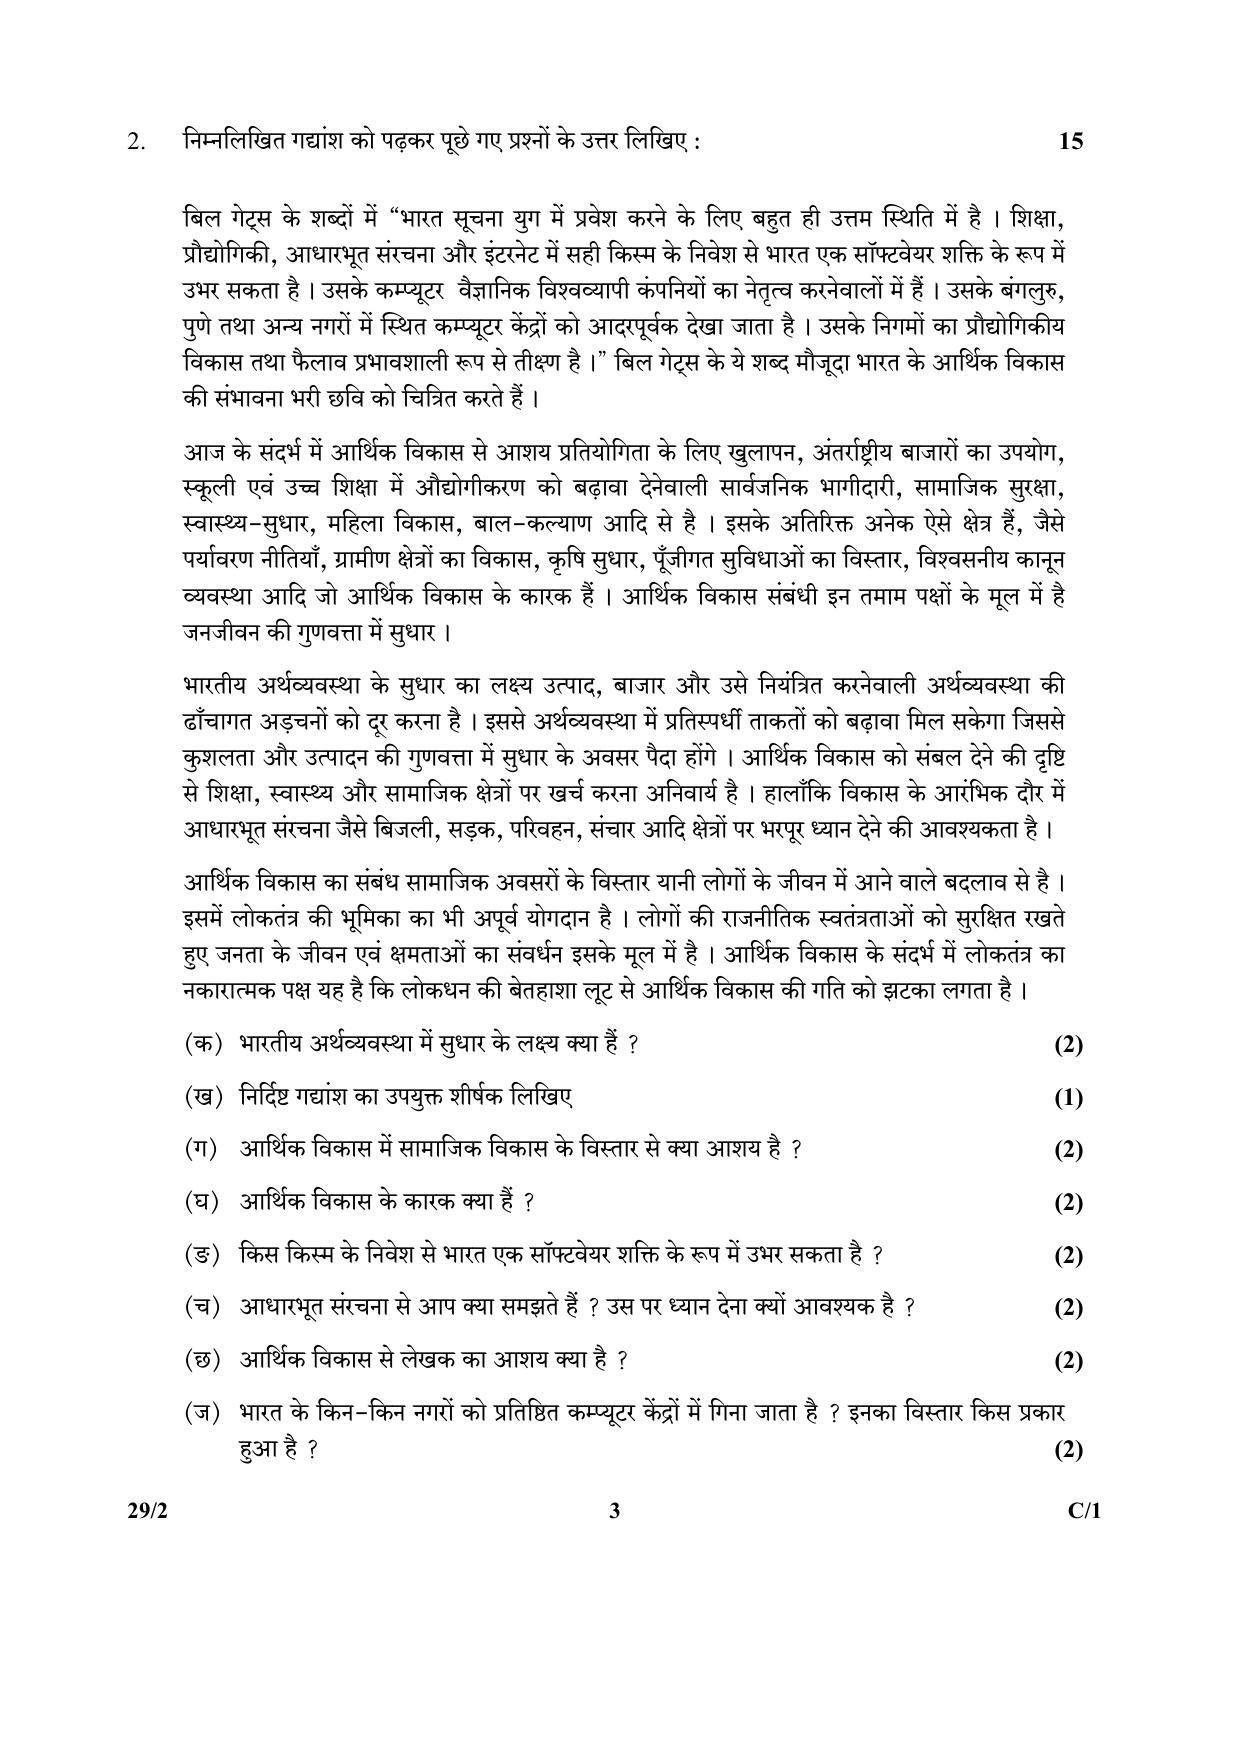 CBSE Class 12 29-2 (Hindi Elective) 2018 Compartment Question Paper - Page 3